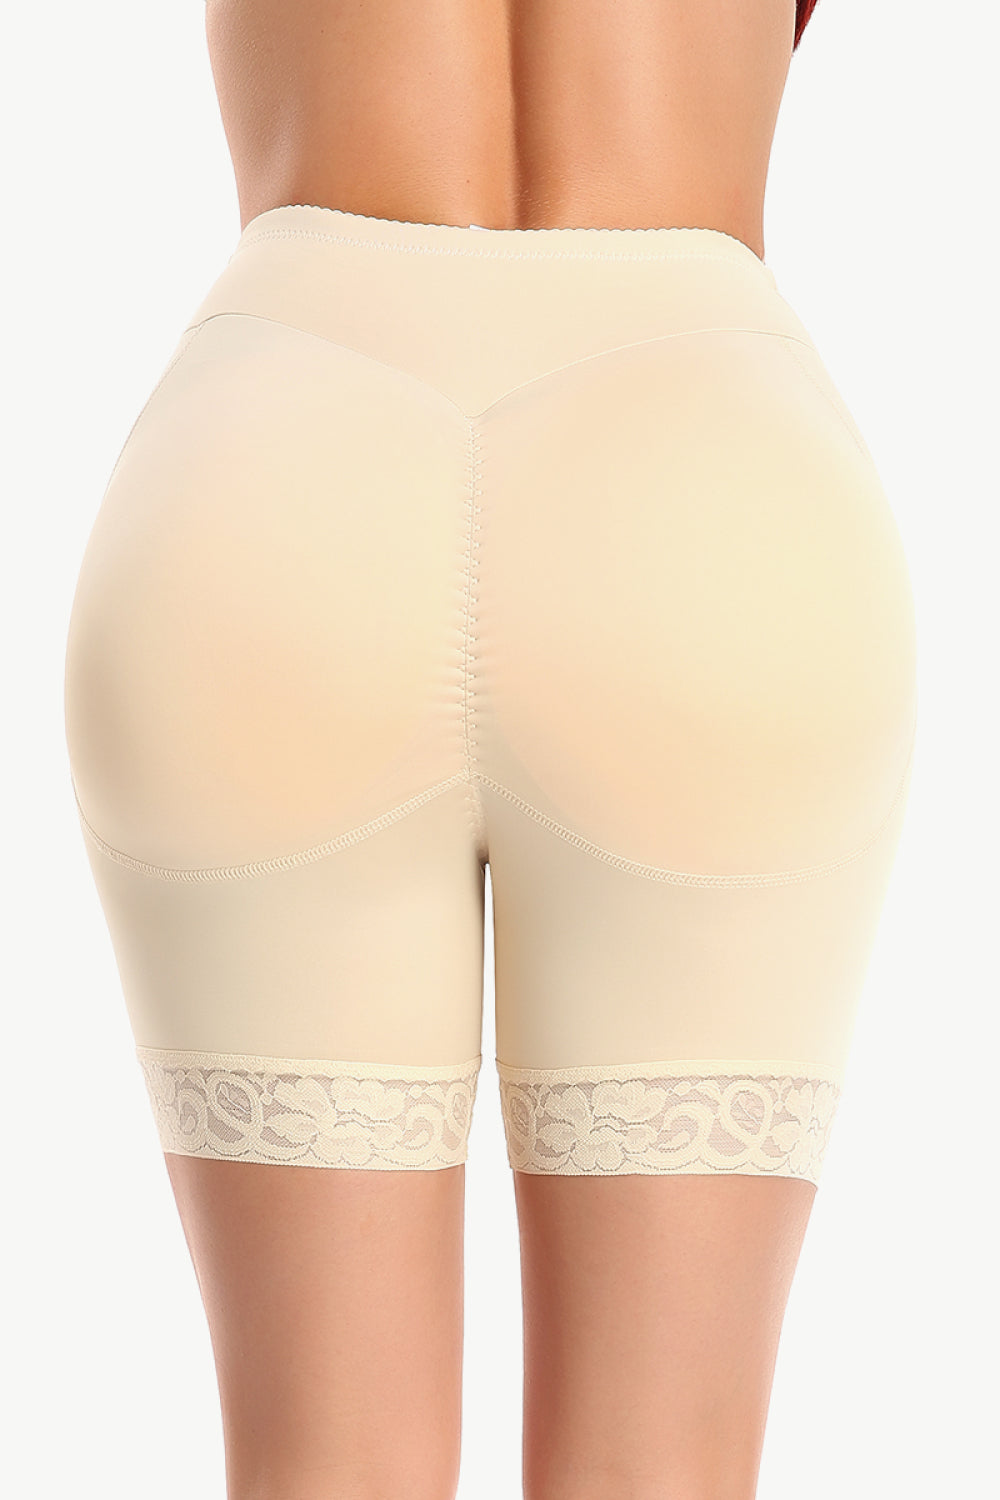 Full Size Lace Trim Lifting Pull-On Shaping Shorts - DromedarShop.com Online Boutique